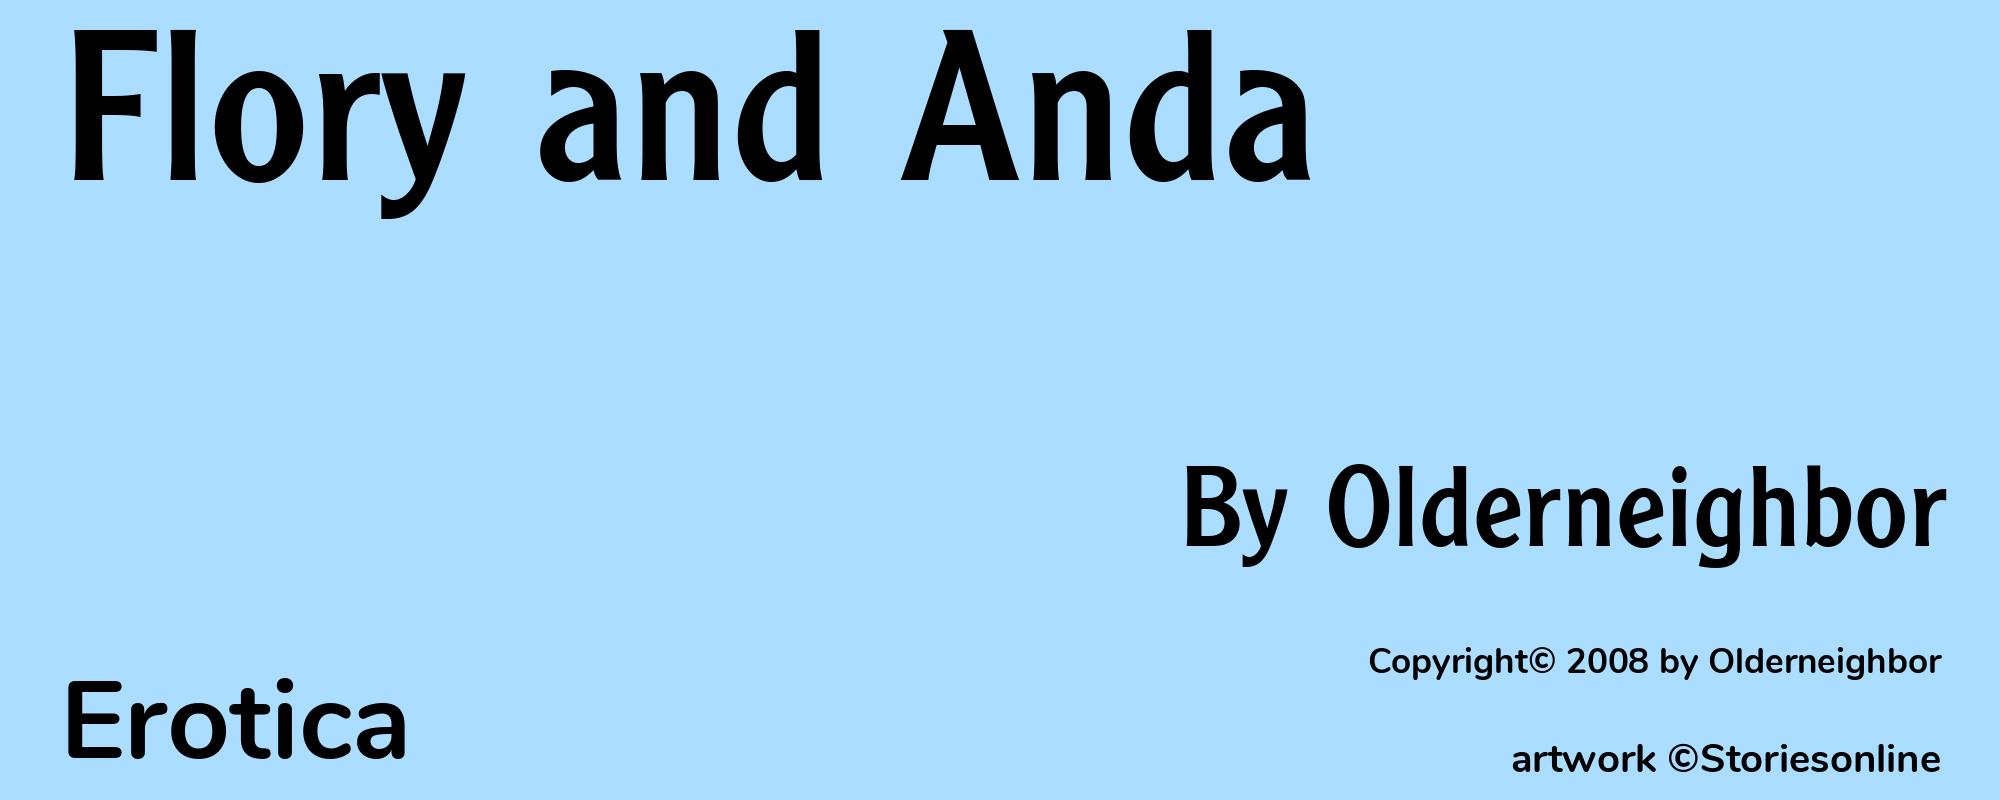 Flory and Anda - Cover